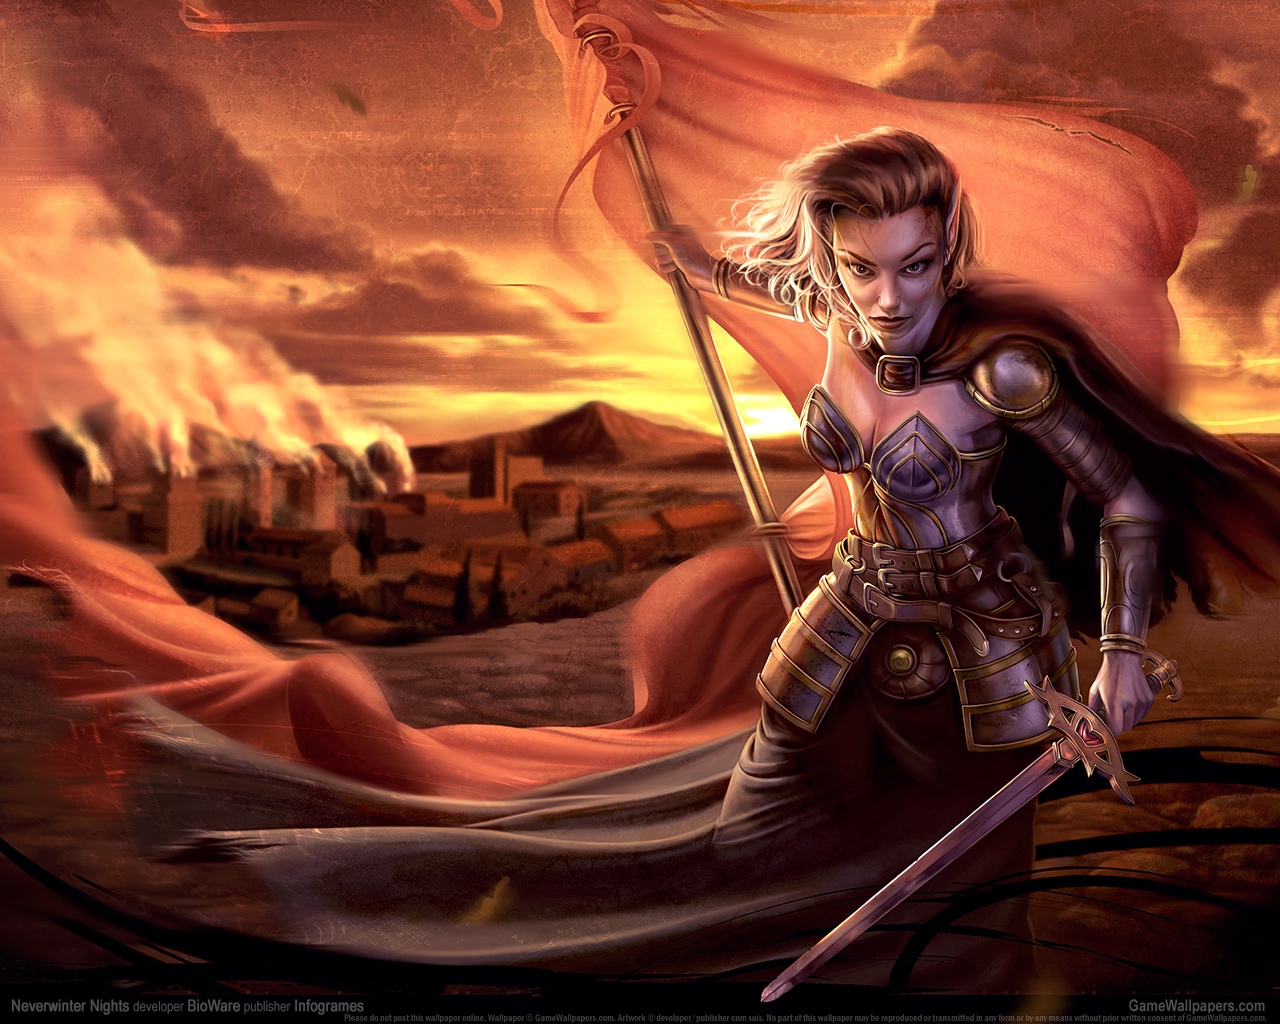 Neverwinter Nights 1280 wallpaper or background 11